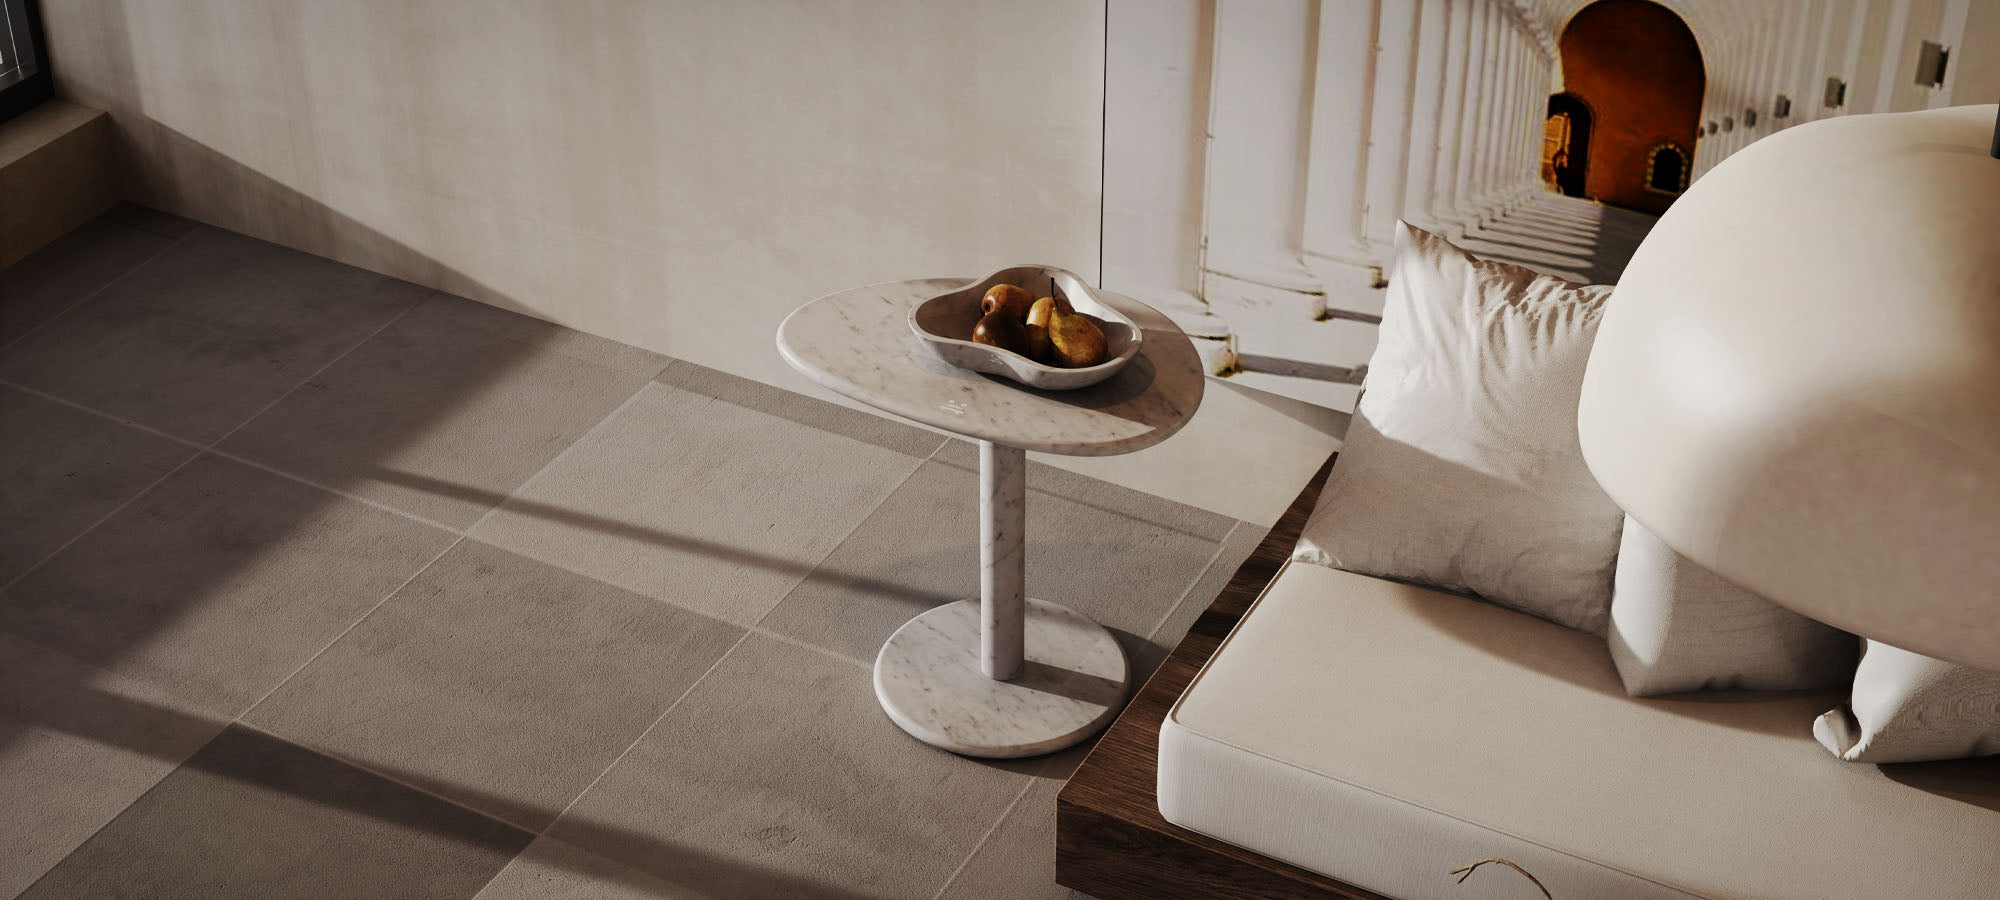 OIXDESIGN Side Table Collection, SwanEgg Side Table, Italian Carrara Marble, Macro Scene Graph, Top View